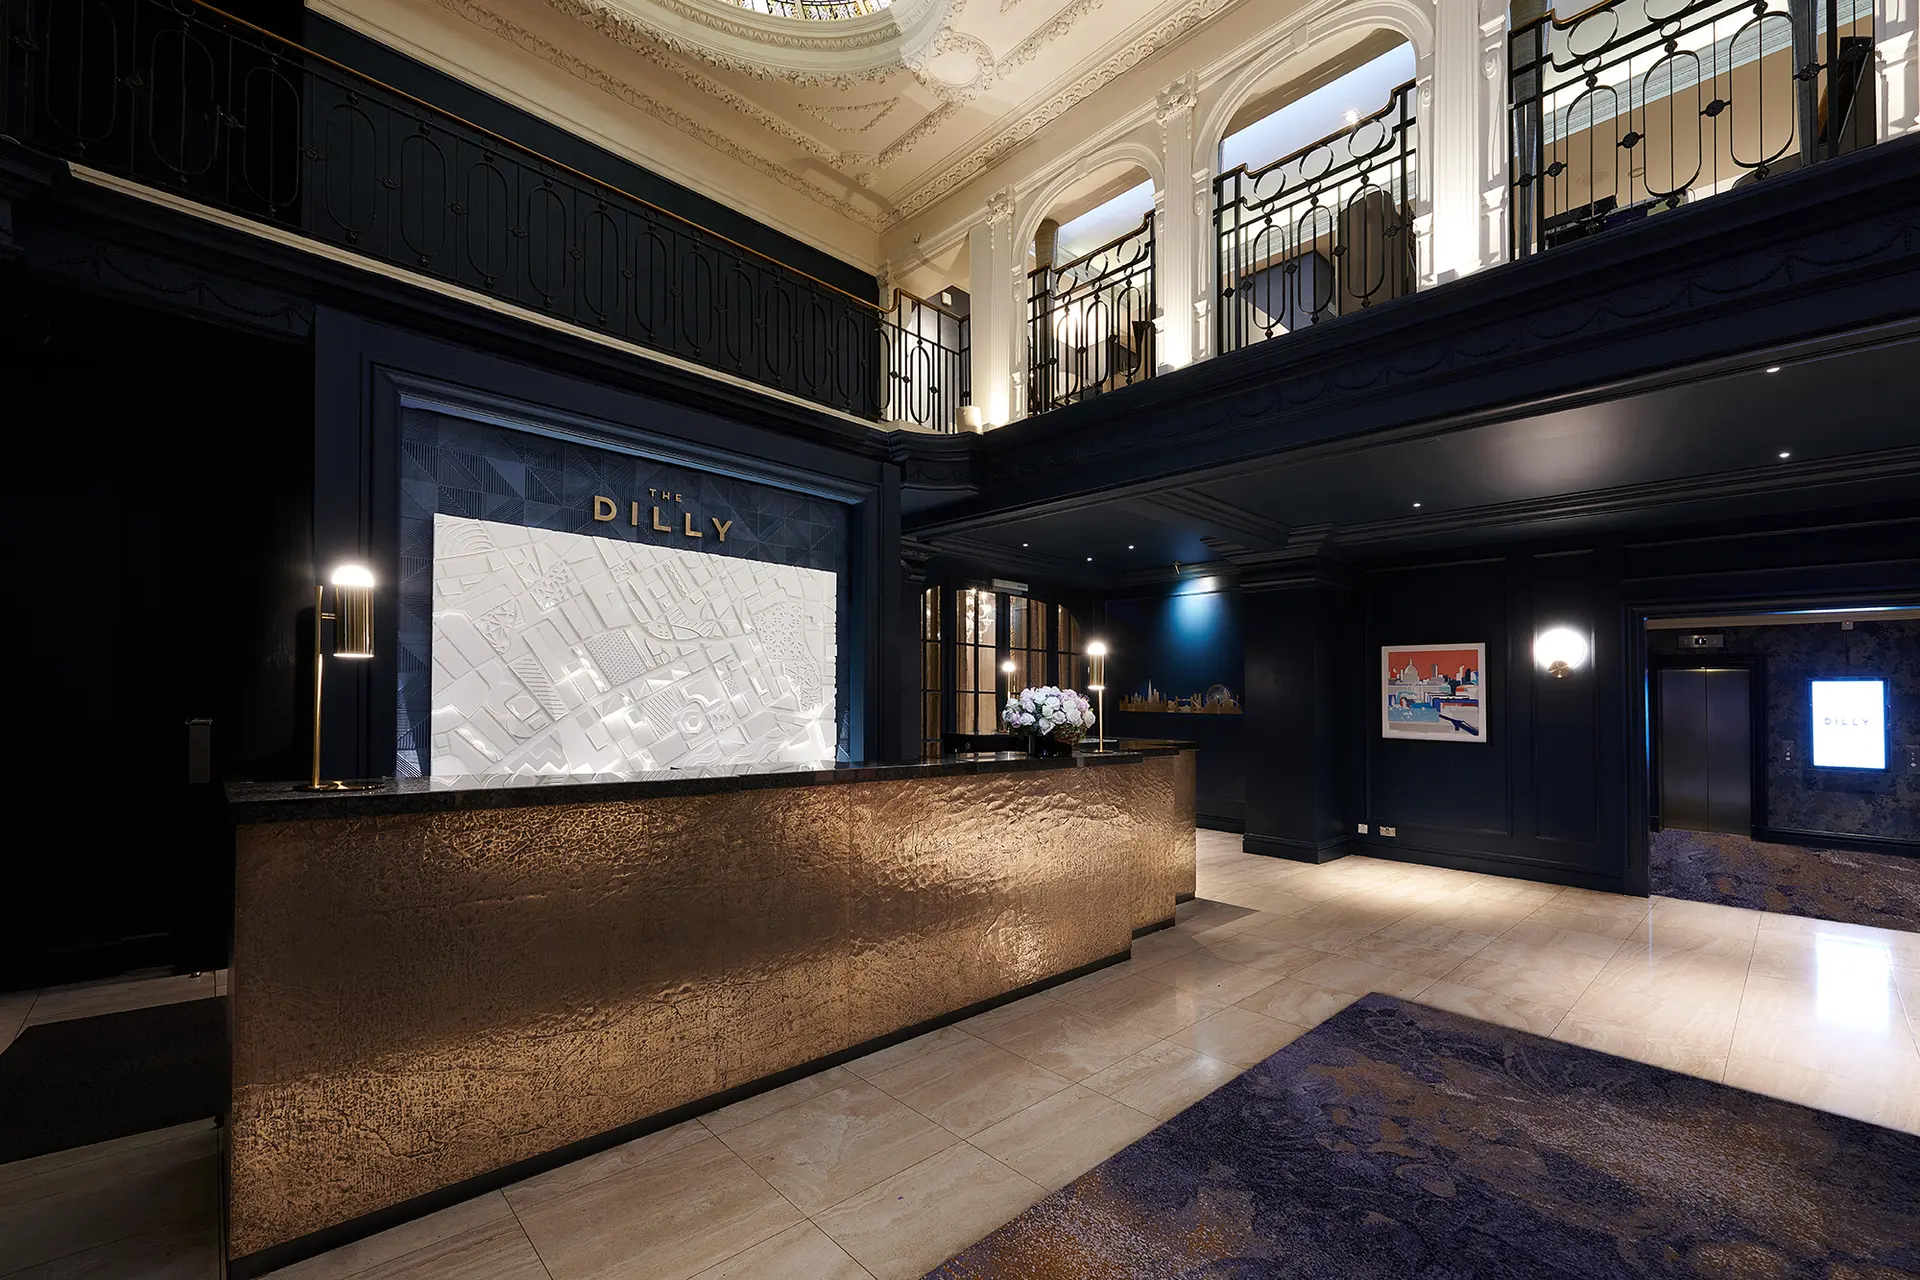 Hotels Articles - London celebrates the opening of The Dilly  